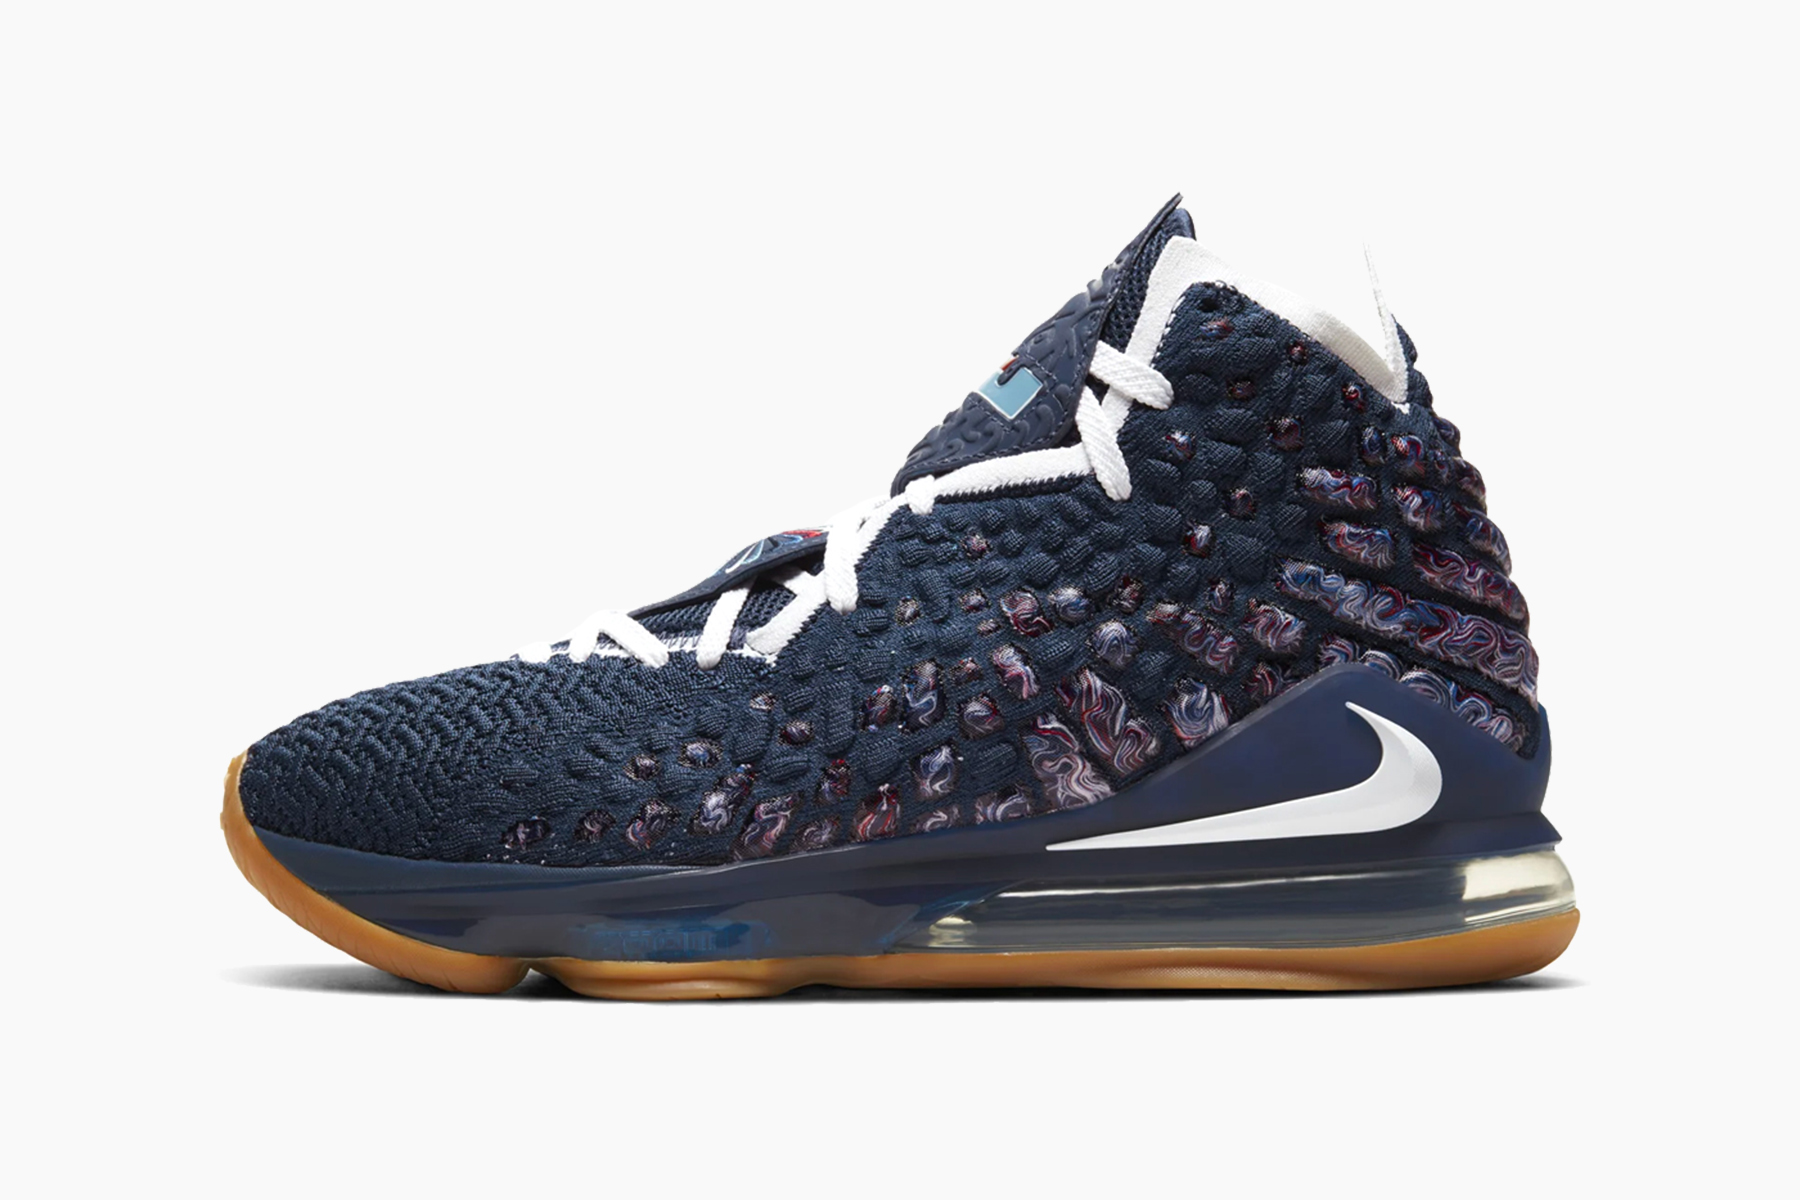 navy blue and white lebrons